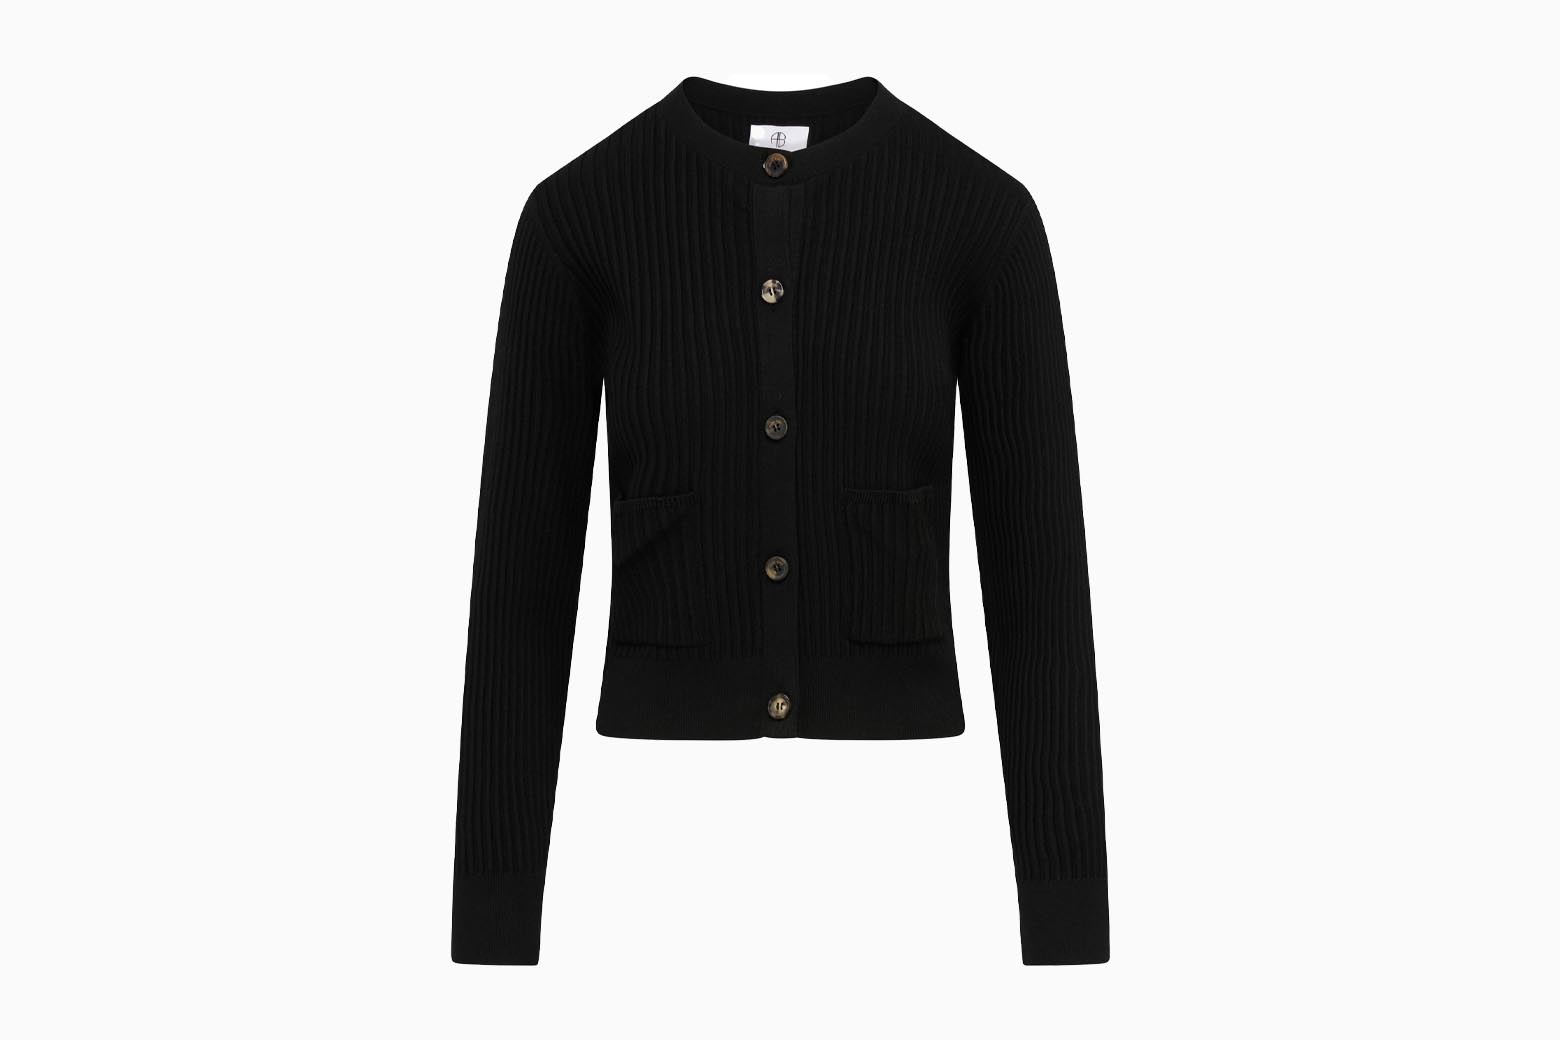 20 Best Cardigans For Women: See How To Style A Chic Cardigan